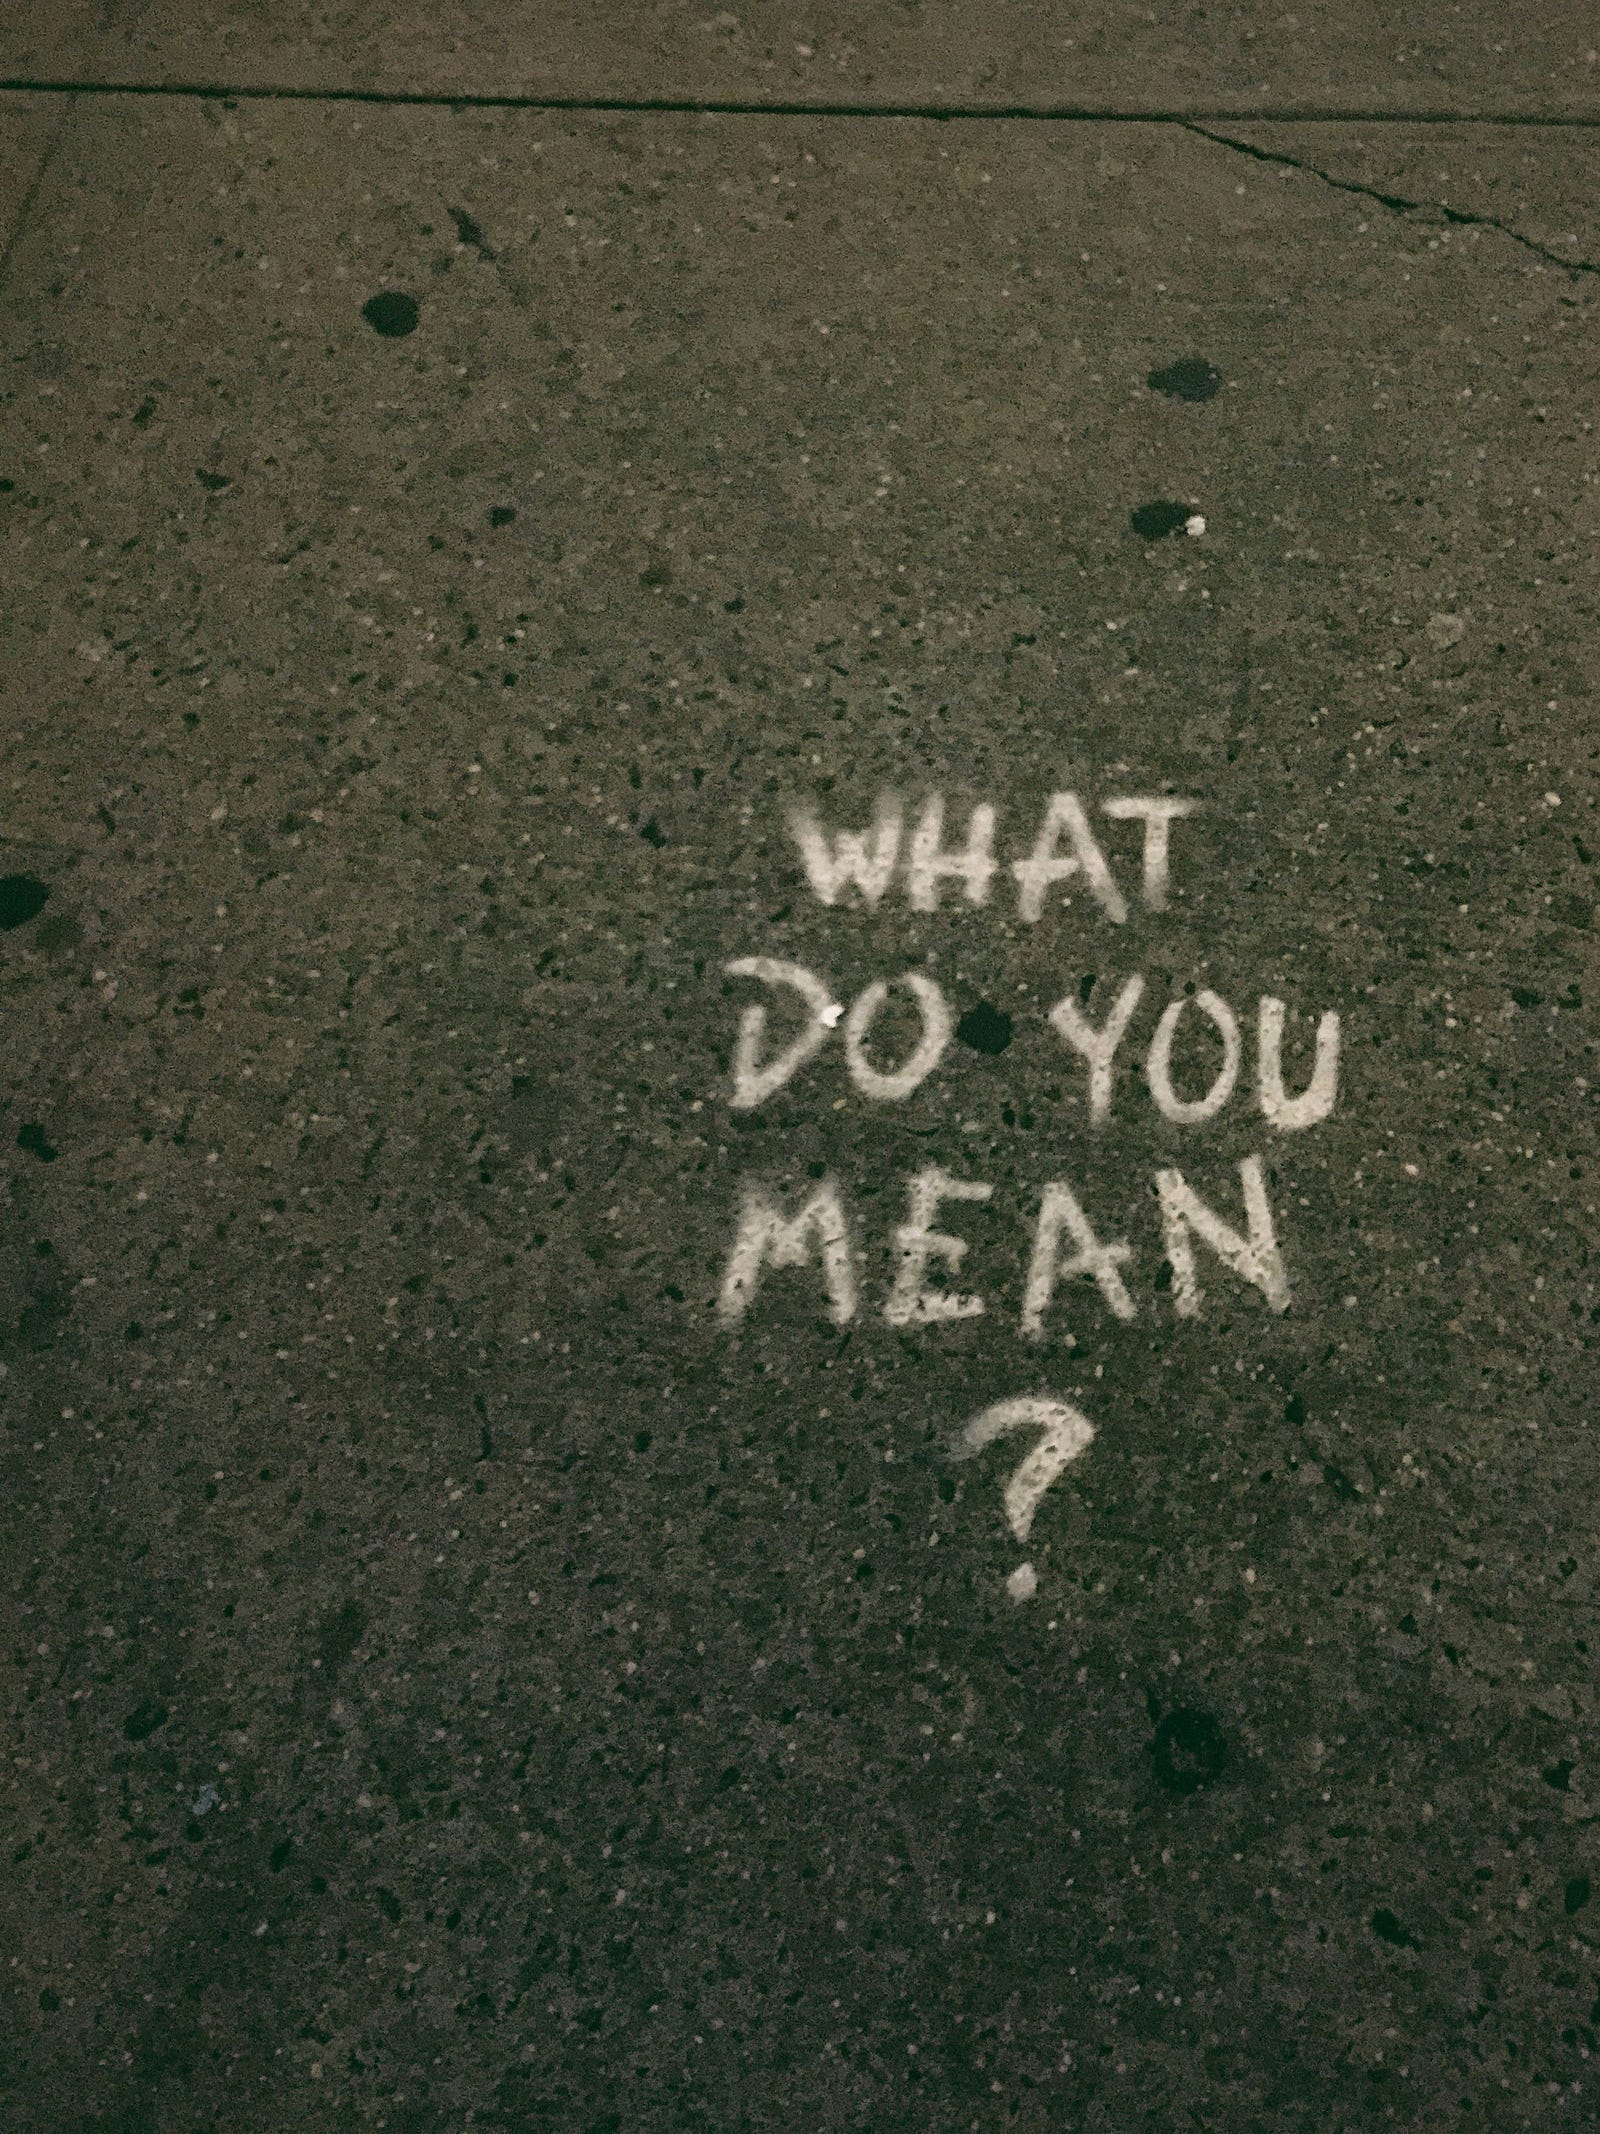 “WHAT DO YOU MEAN?” is written in white letters on pavement.